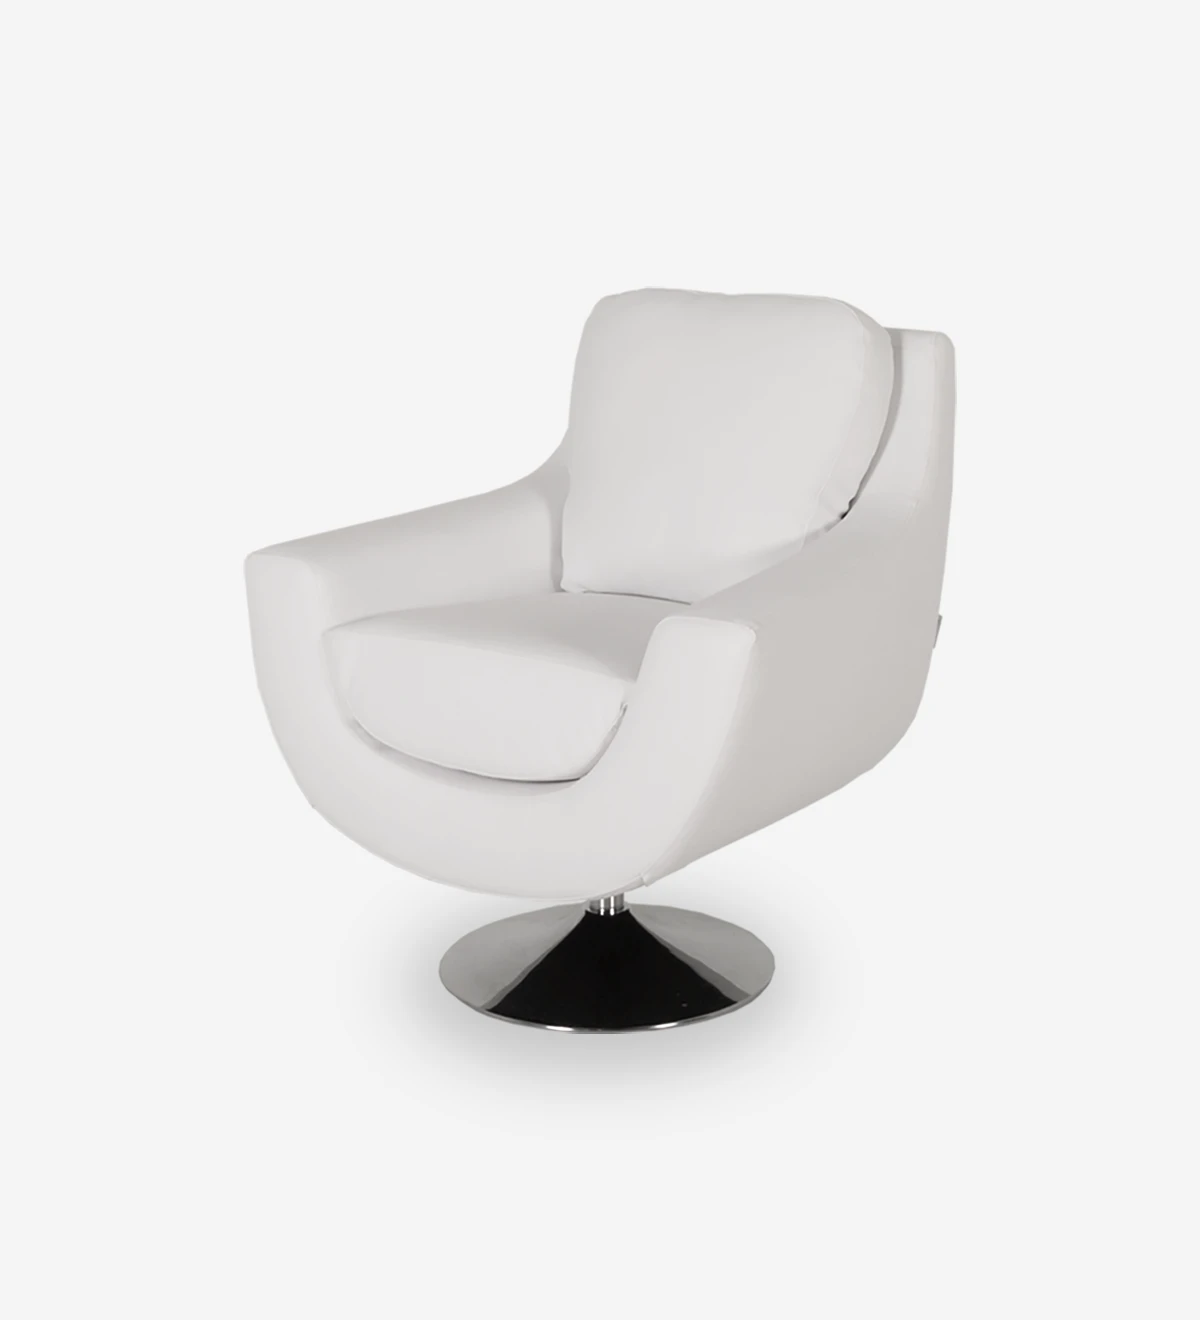 Amrchair upholstered in eco-leather with swivel base.